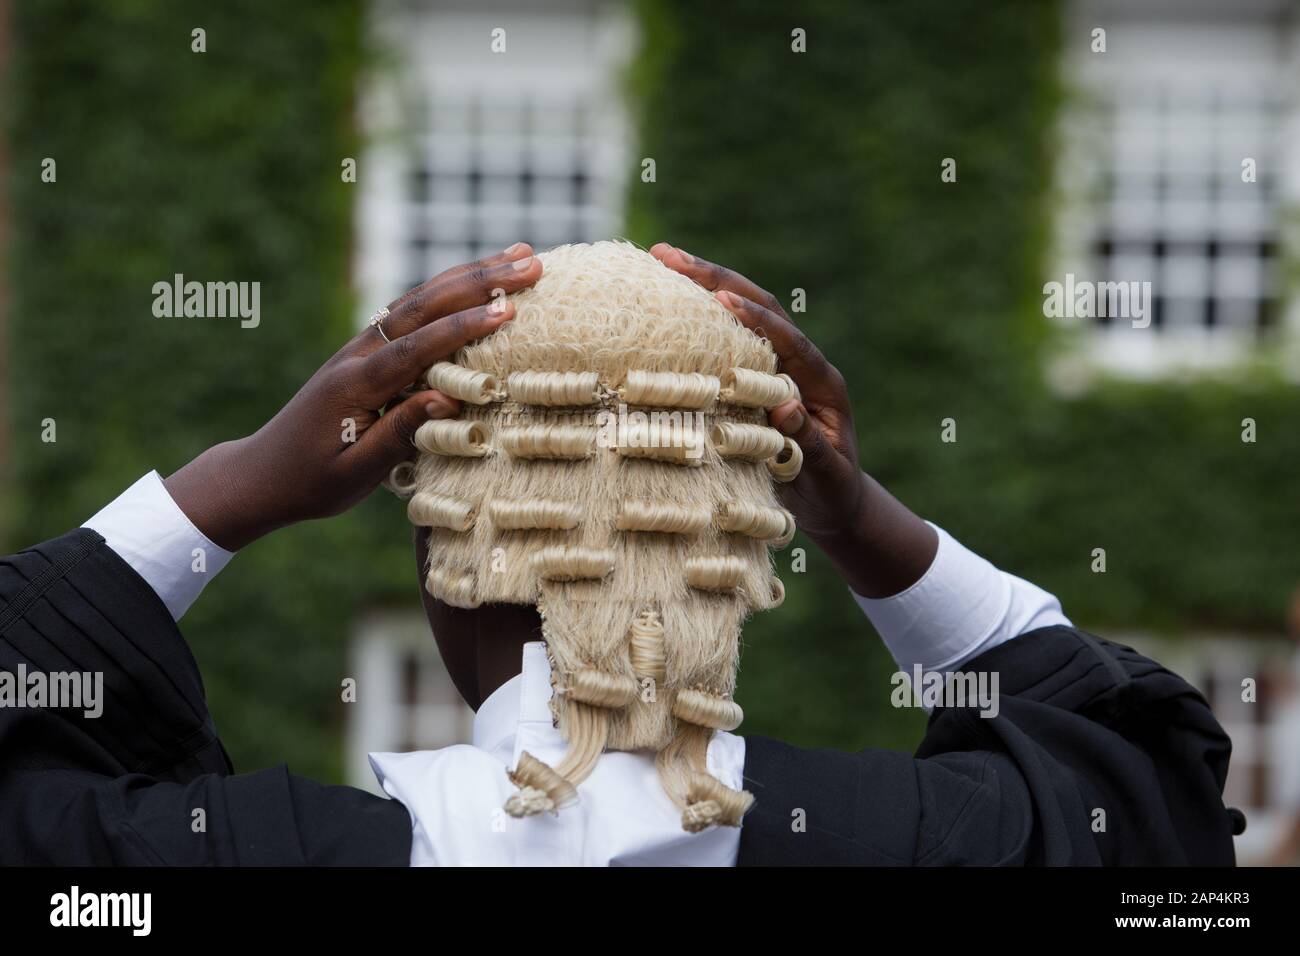 A wig being put on by a black female barrister,  as worn by a barrister or judge in England and Wales, also known as a peruke. Stock Photo